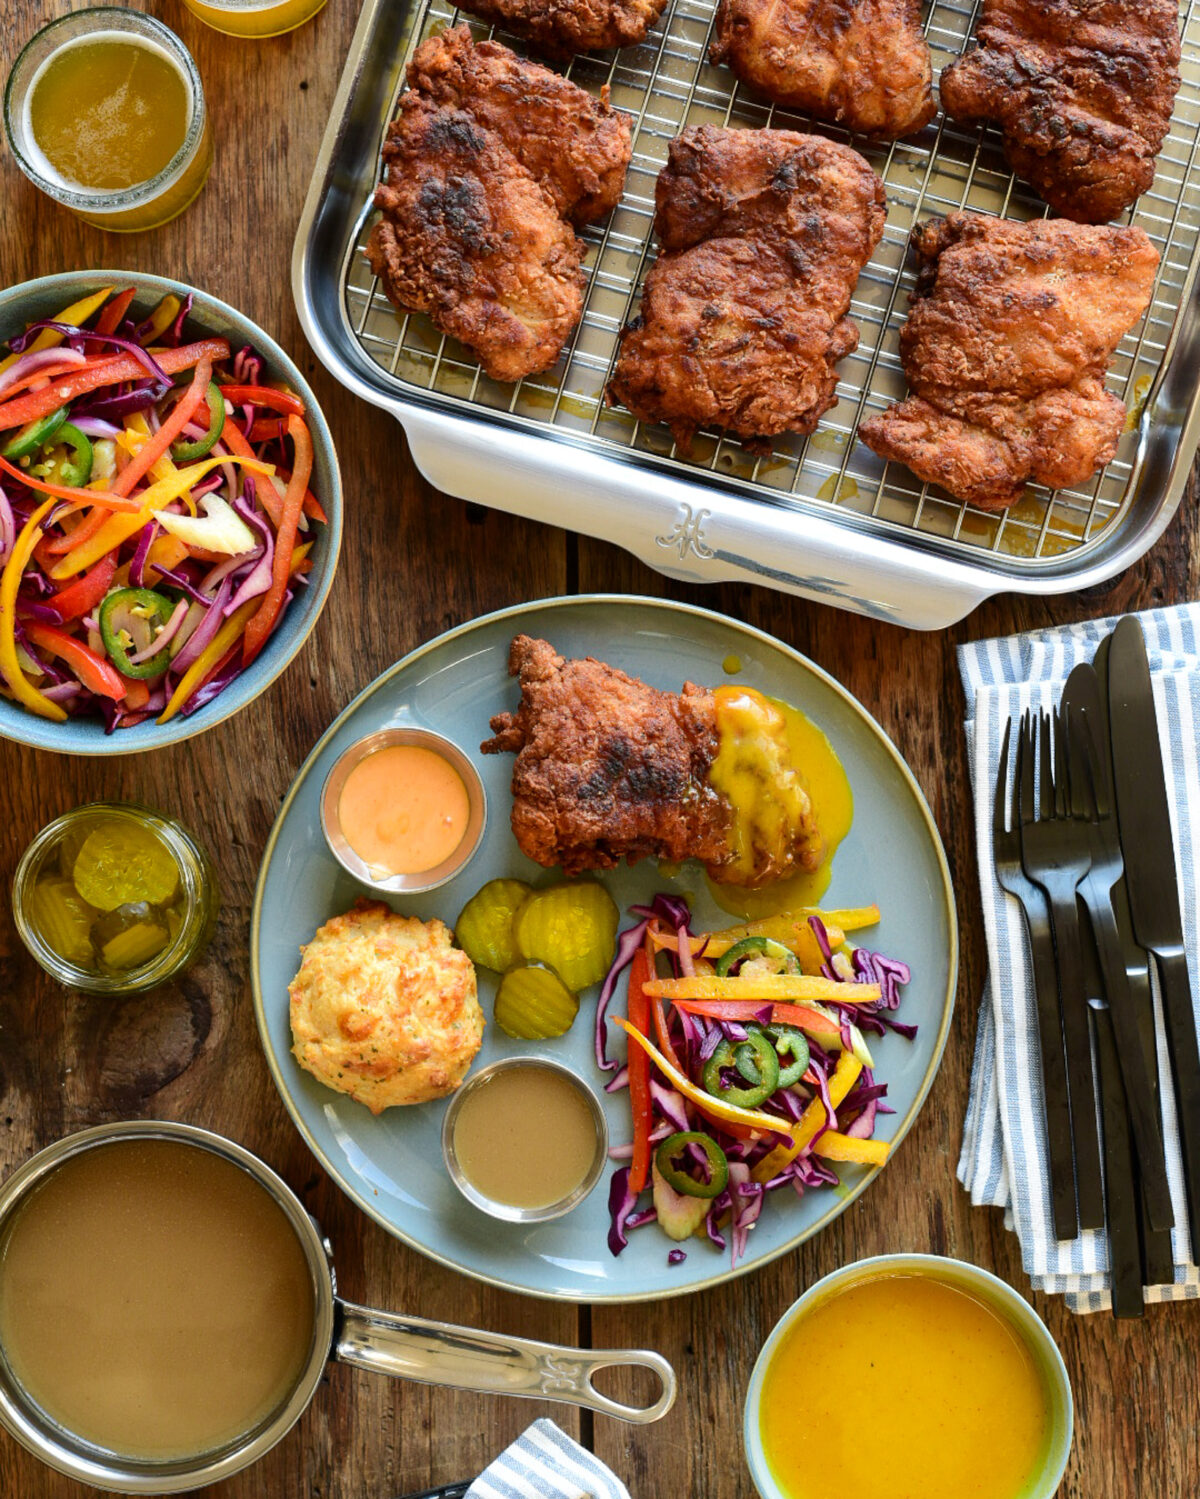 Spicy Buttermilk Fried Chicken served with three dipping sauces, slaw and cheddar biscuits.